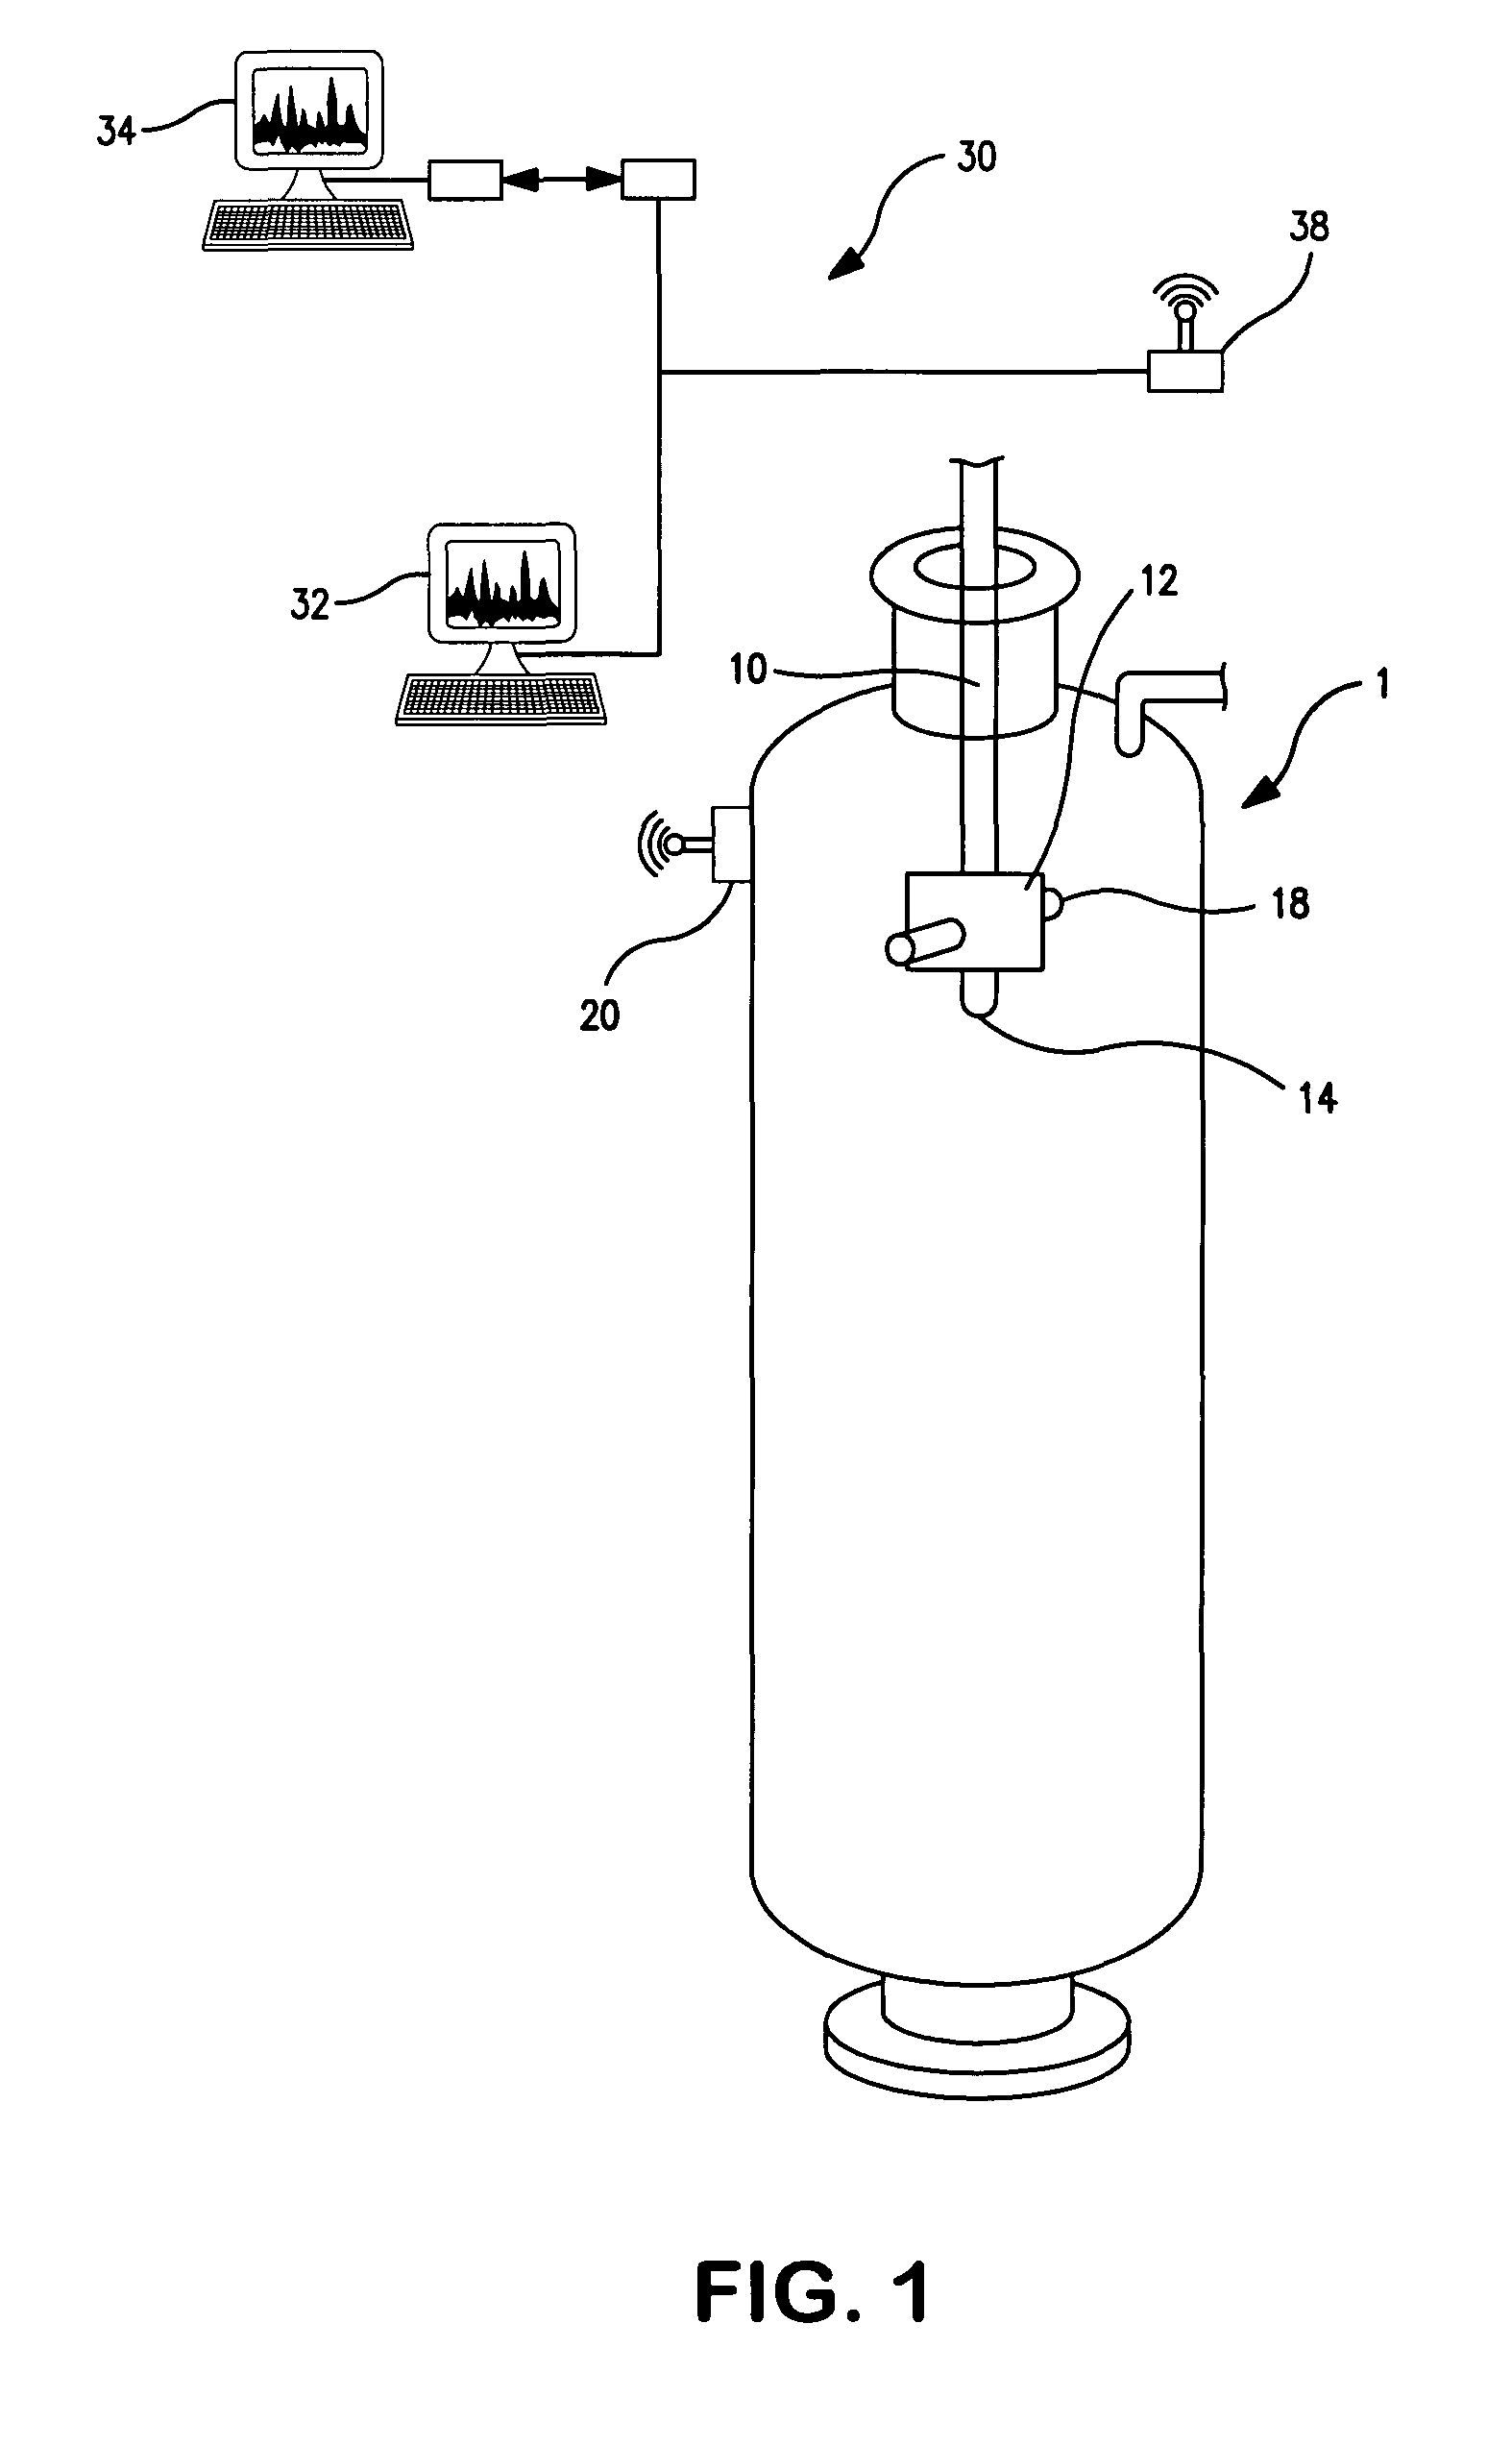 Optimized coke cutting method for decoking substantially free-flowing coke in delayed cokers